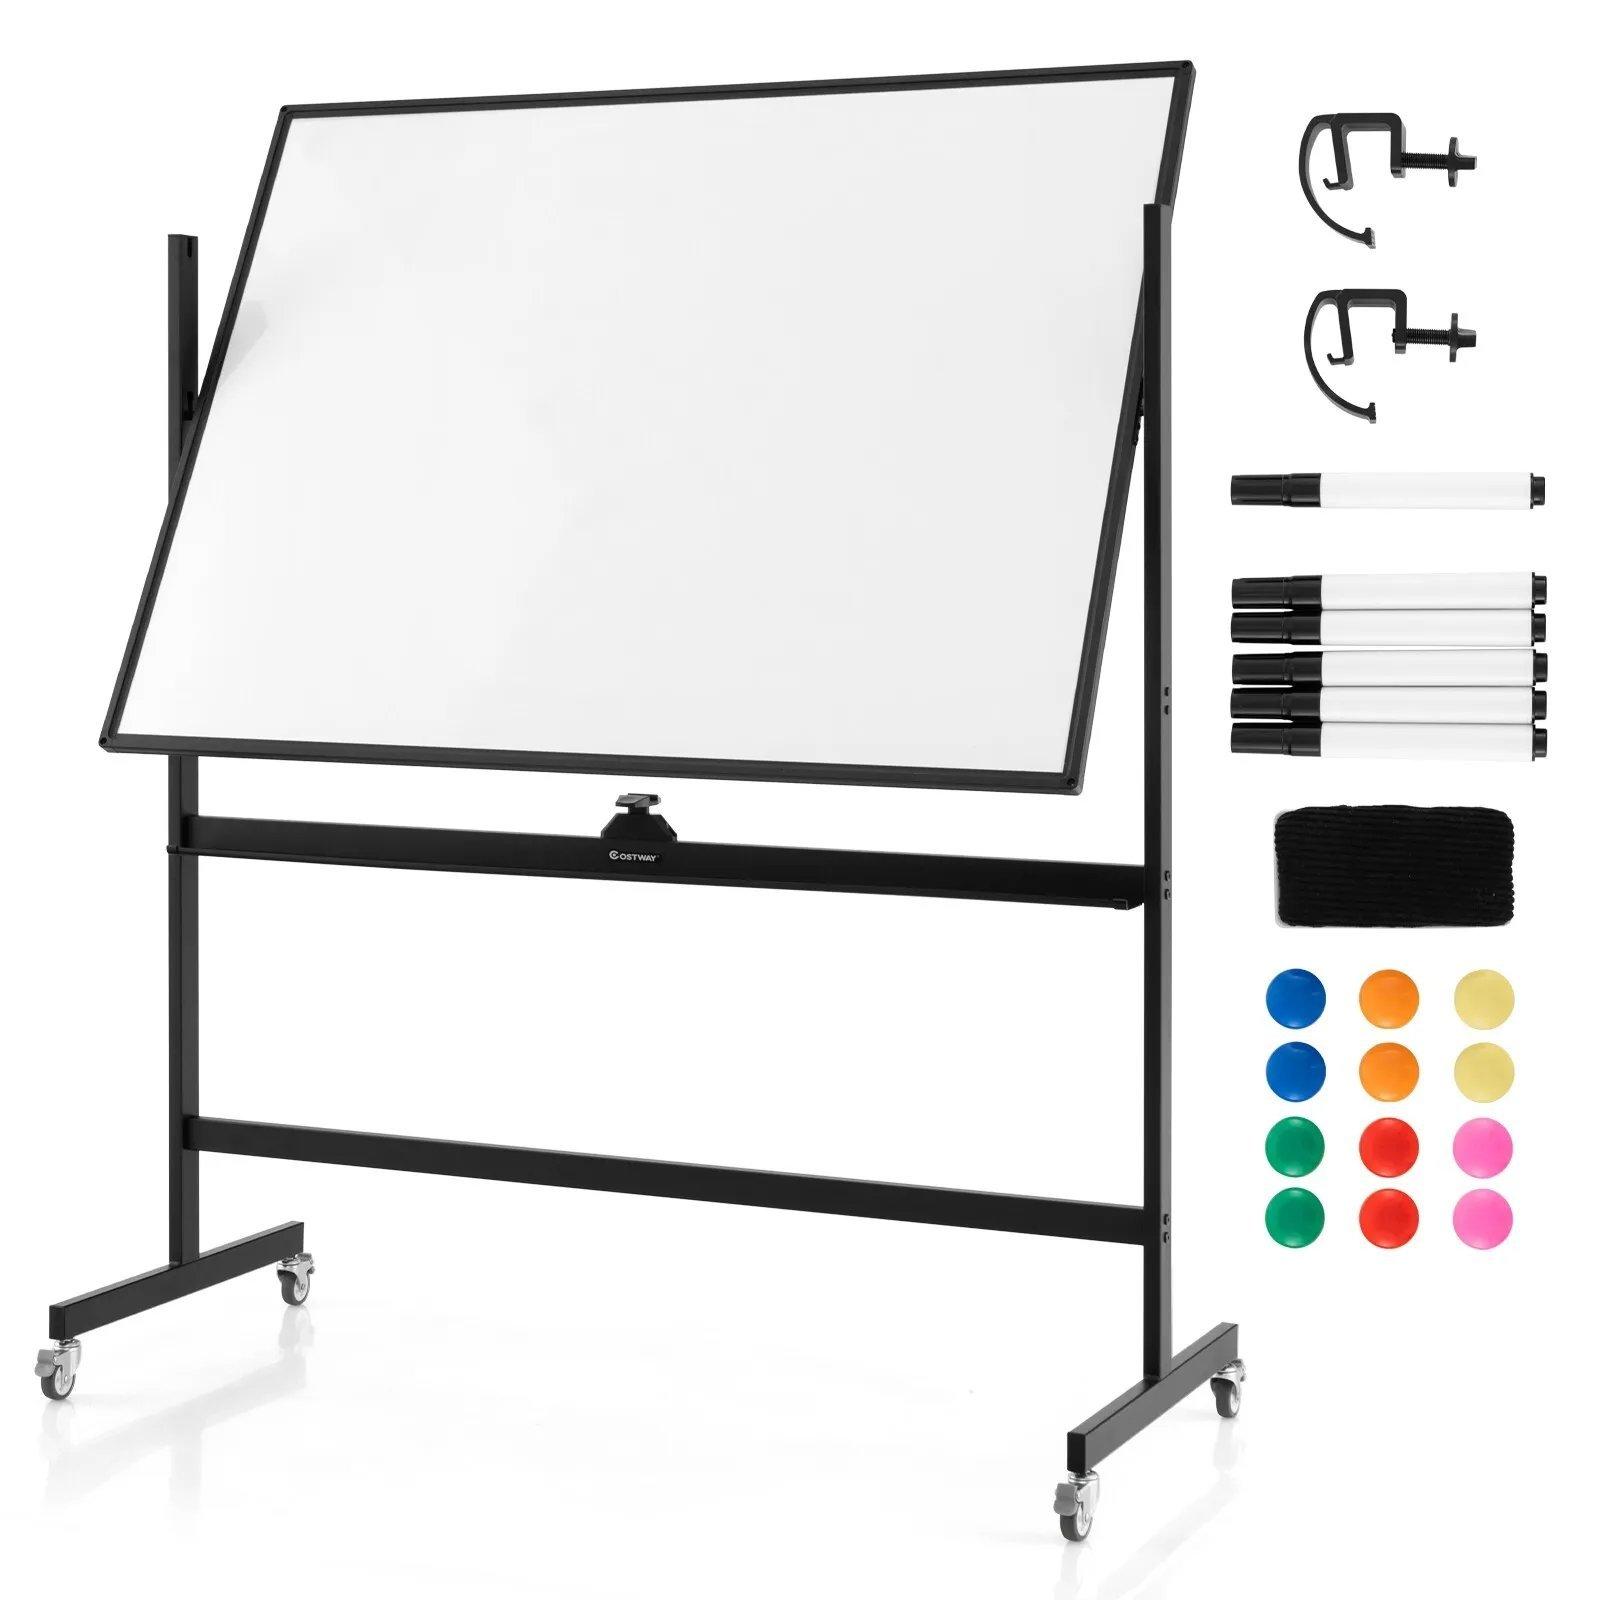 Double Sided Magnetic Whiteboard Adjustable Mobile Revolving Board with Magnets